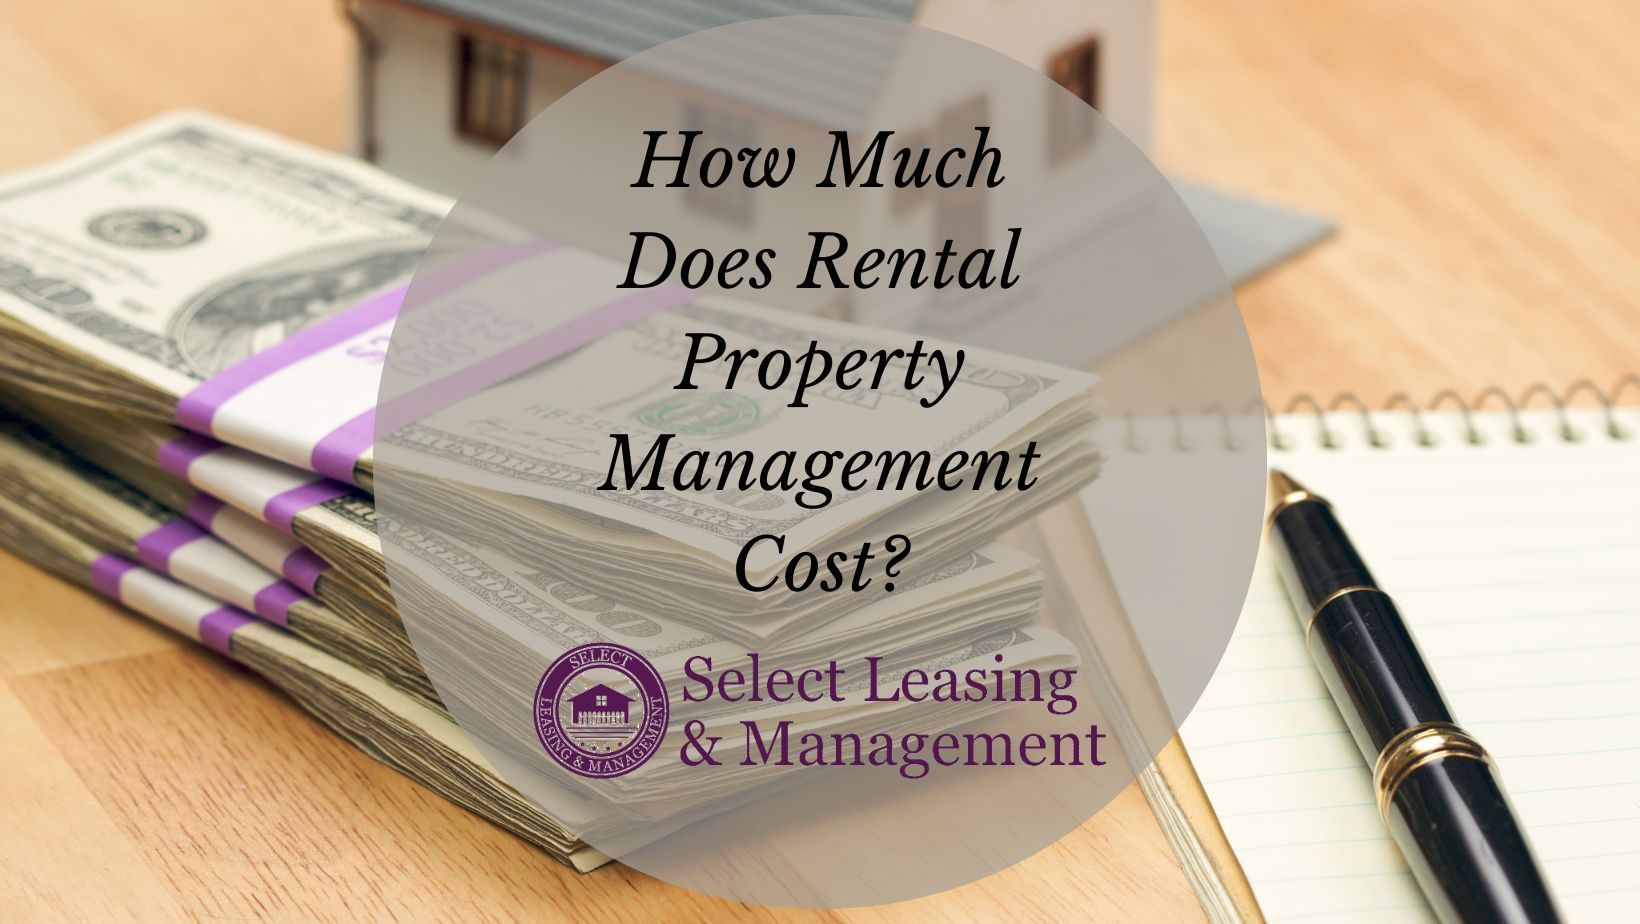 How Much Does Rental Property Management Cost?